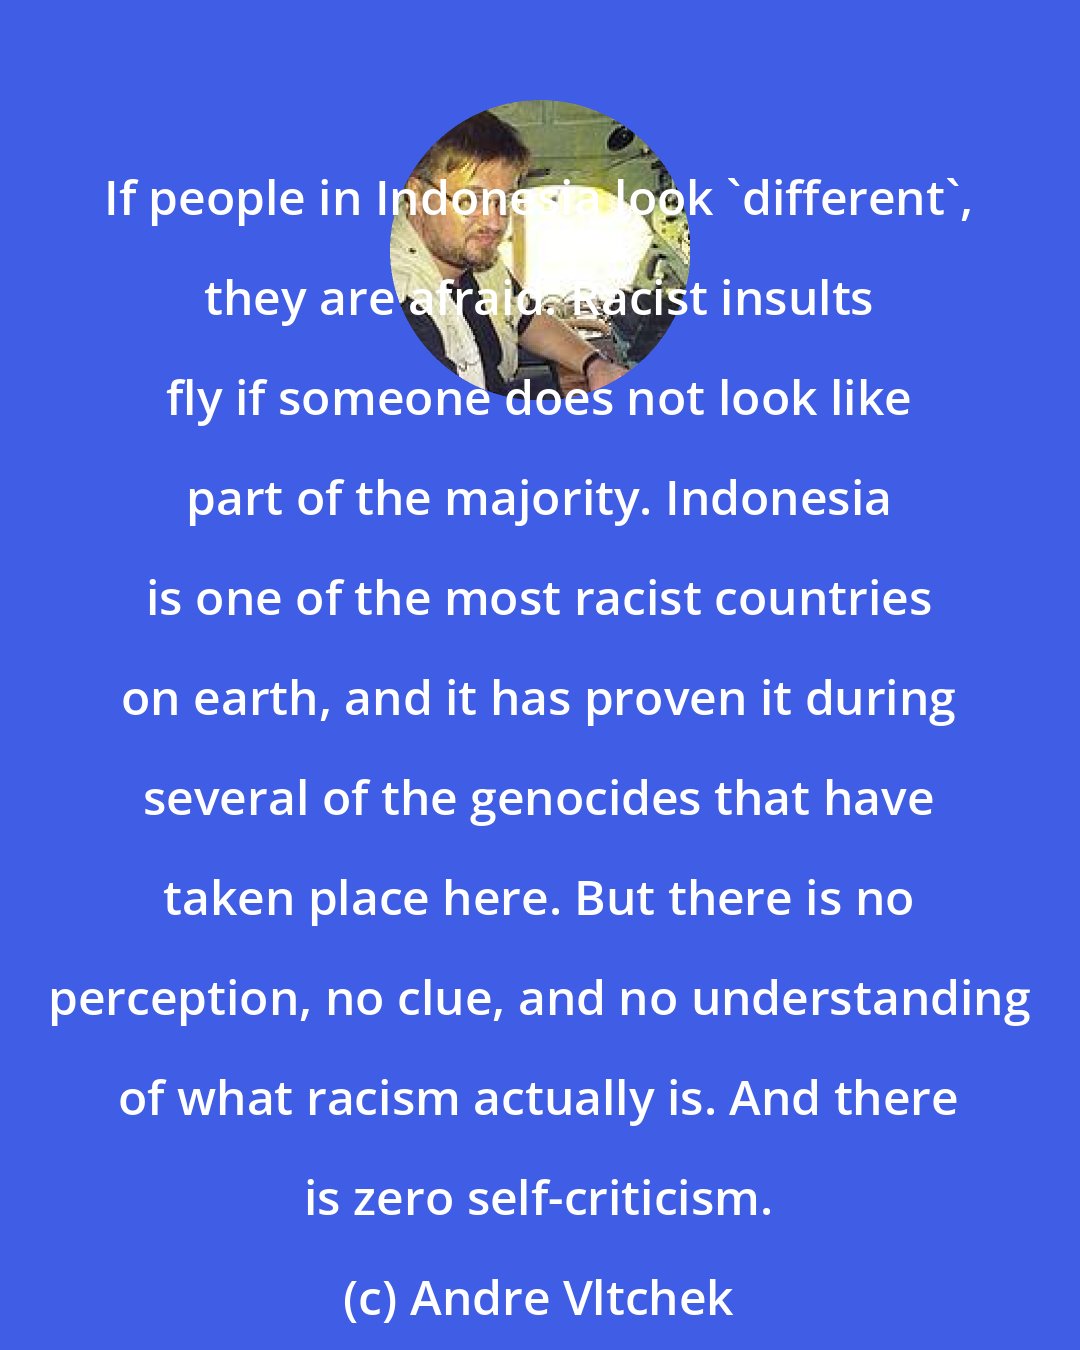 Andre Vltchek: If people in Indonesia look 'different', they are afraid. Racist insults fly if someone does not look like part of the majority. Indonesia is one of the most racist countries on earth, and it has proven it during several of the genocides that have taken place here. But there is no perception, no clue, and no understanding of what racism actually is. And there is zero self-criticism.